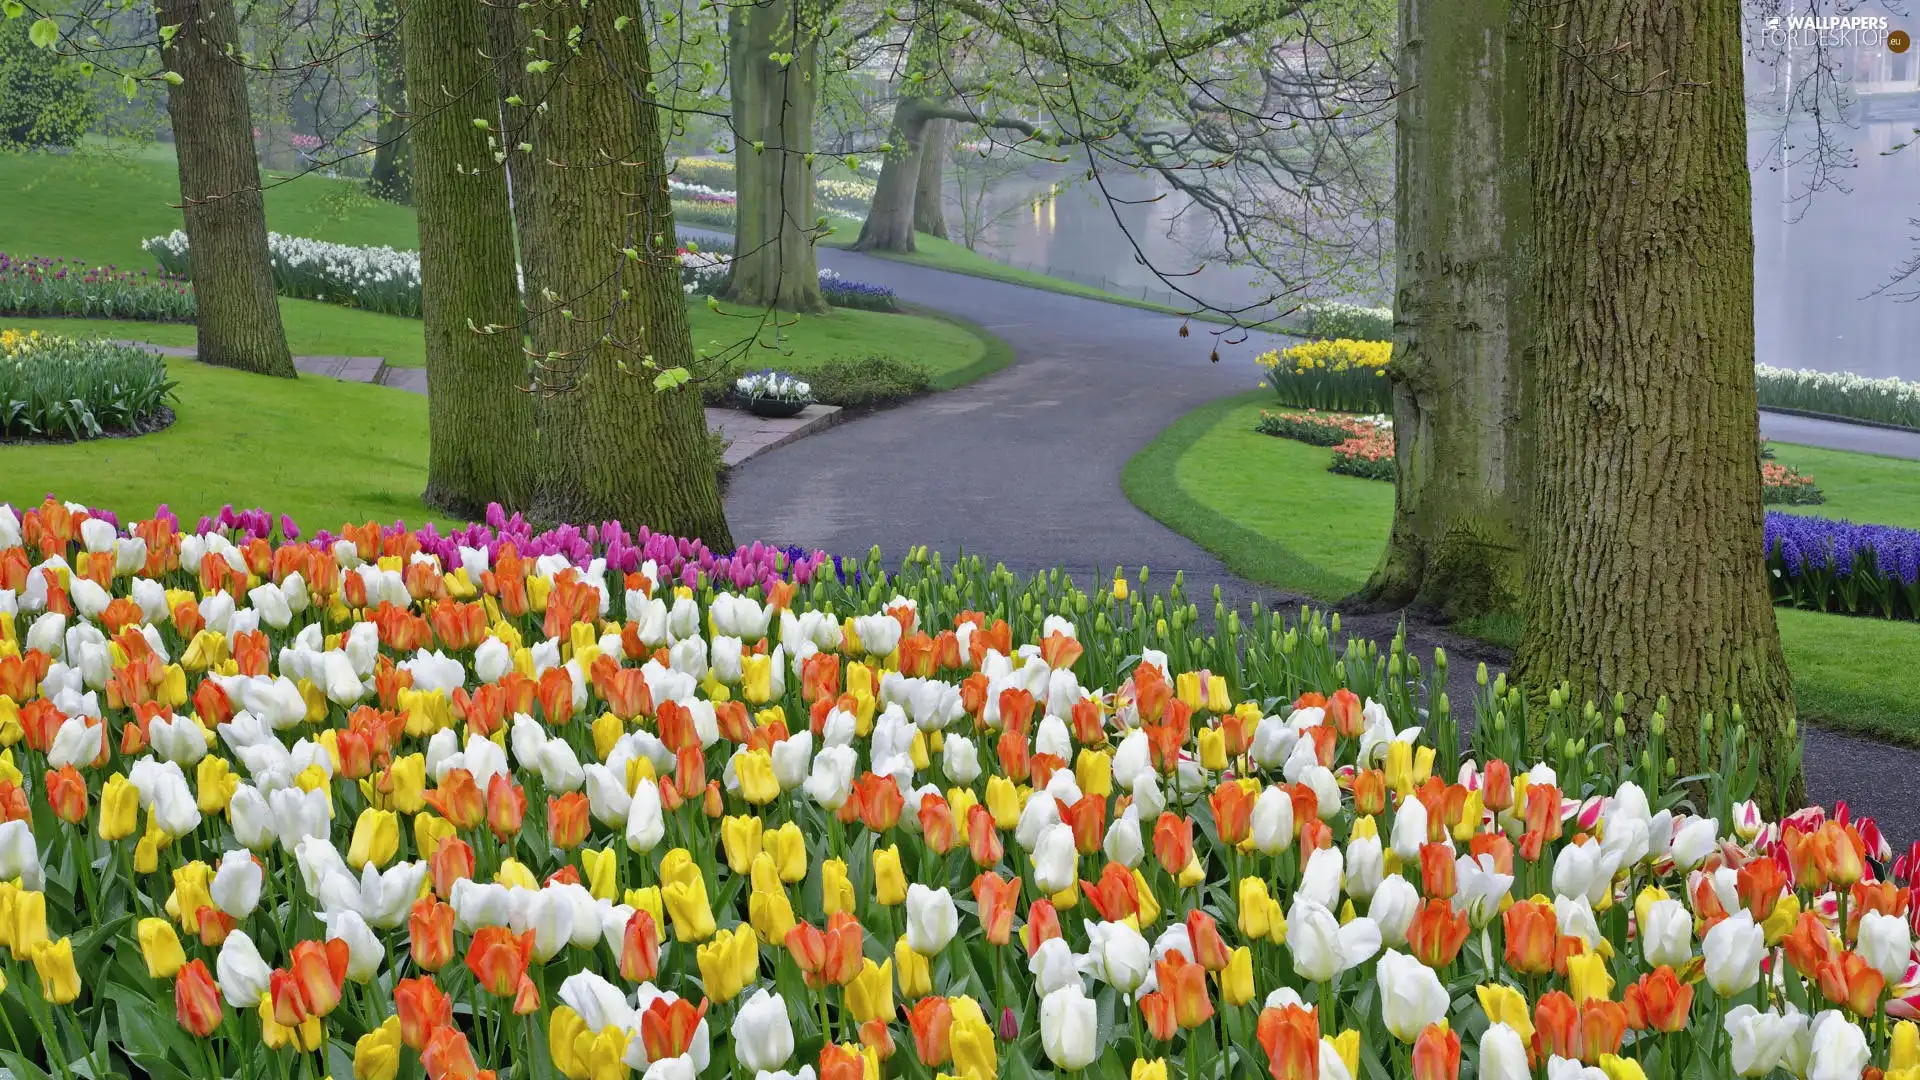 Tracks, viewes, Tulips, trees